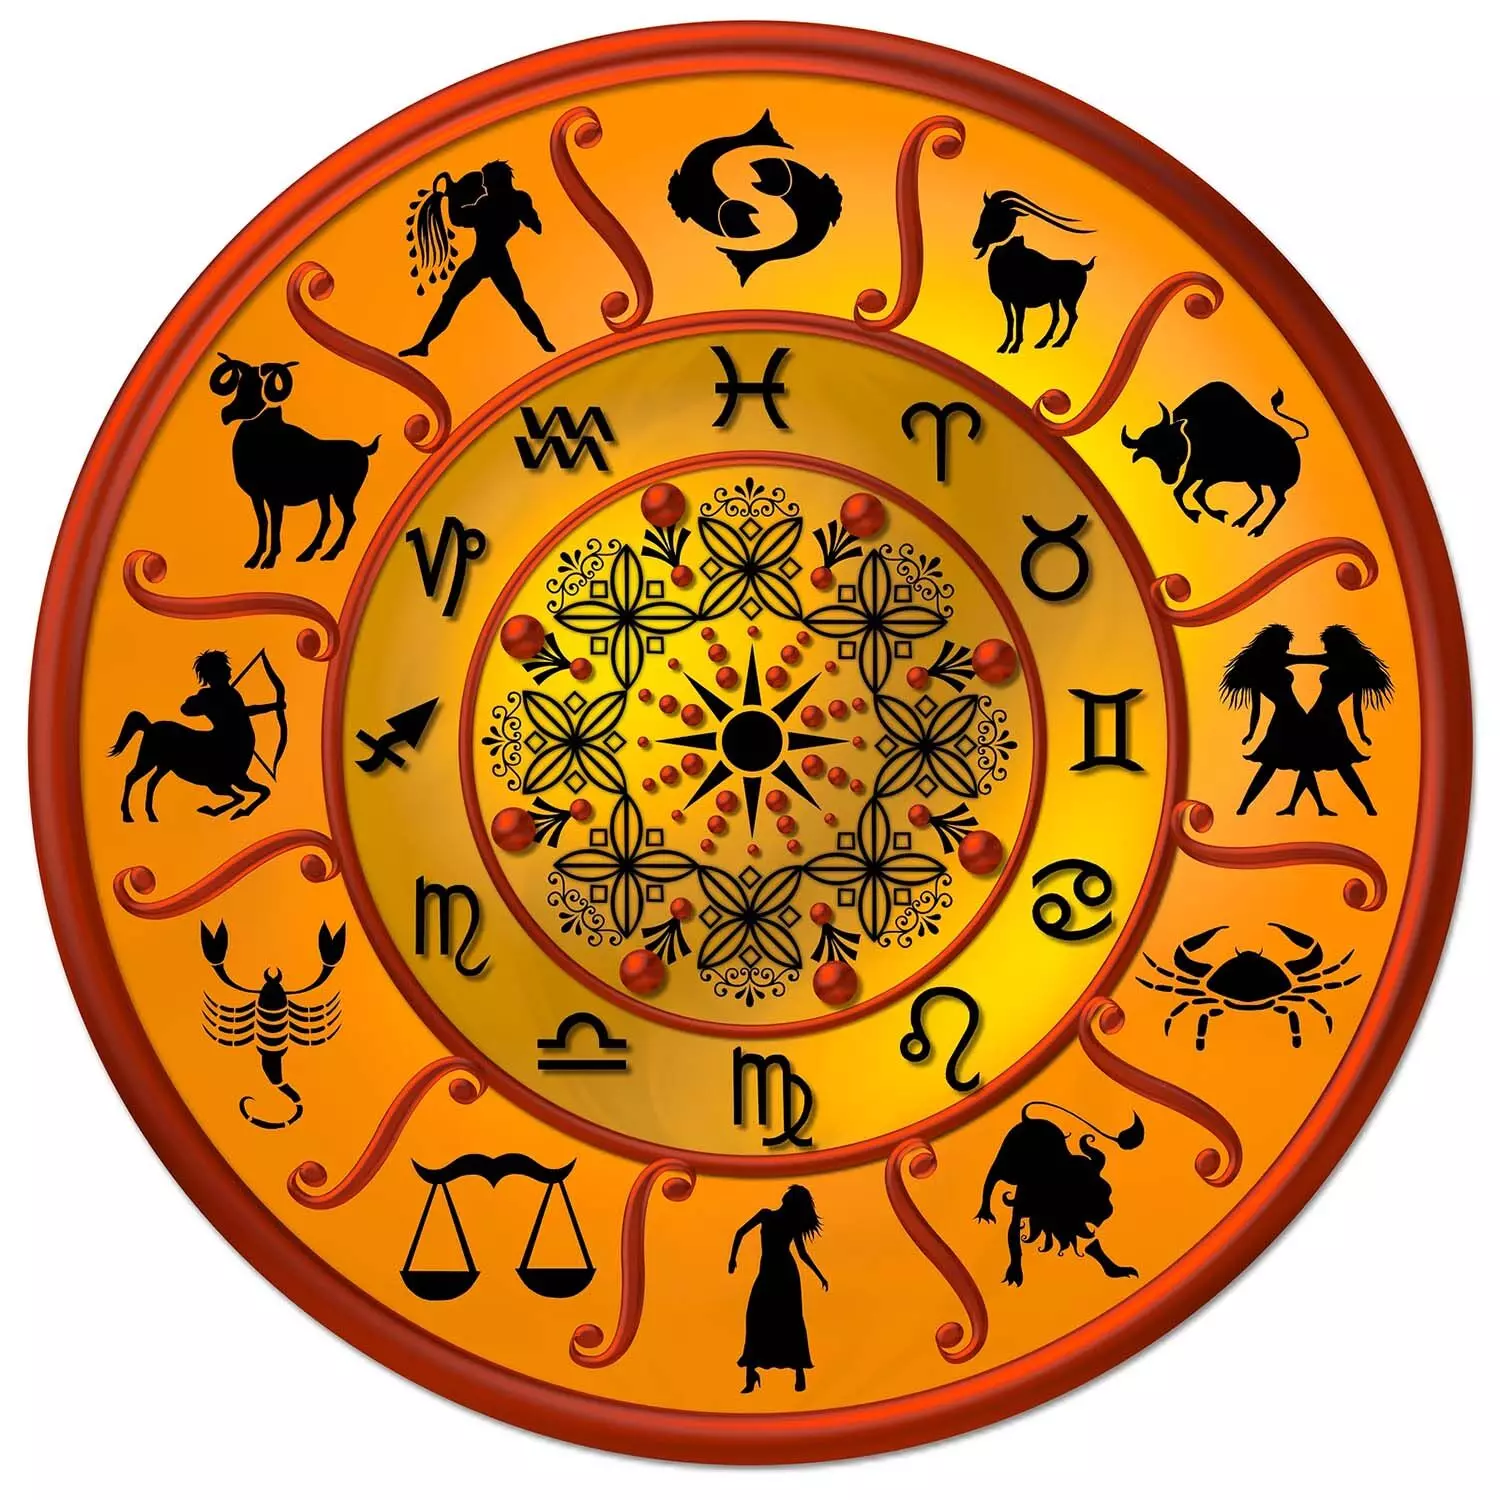 28 June – Know your todays horoscope